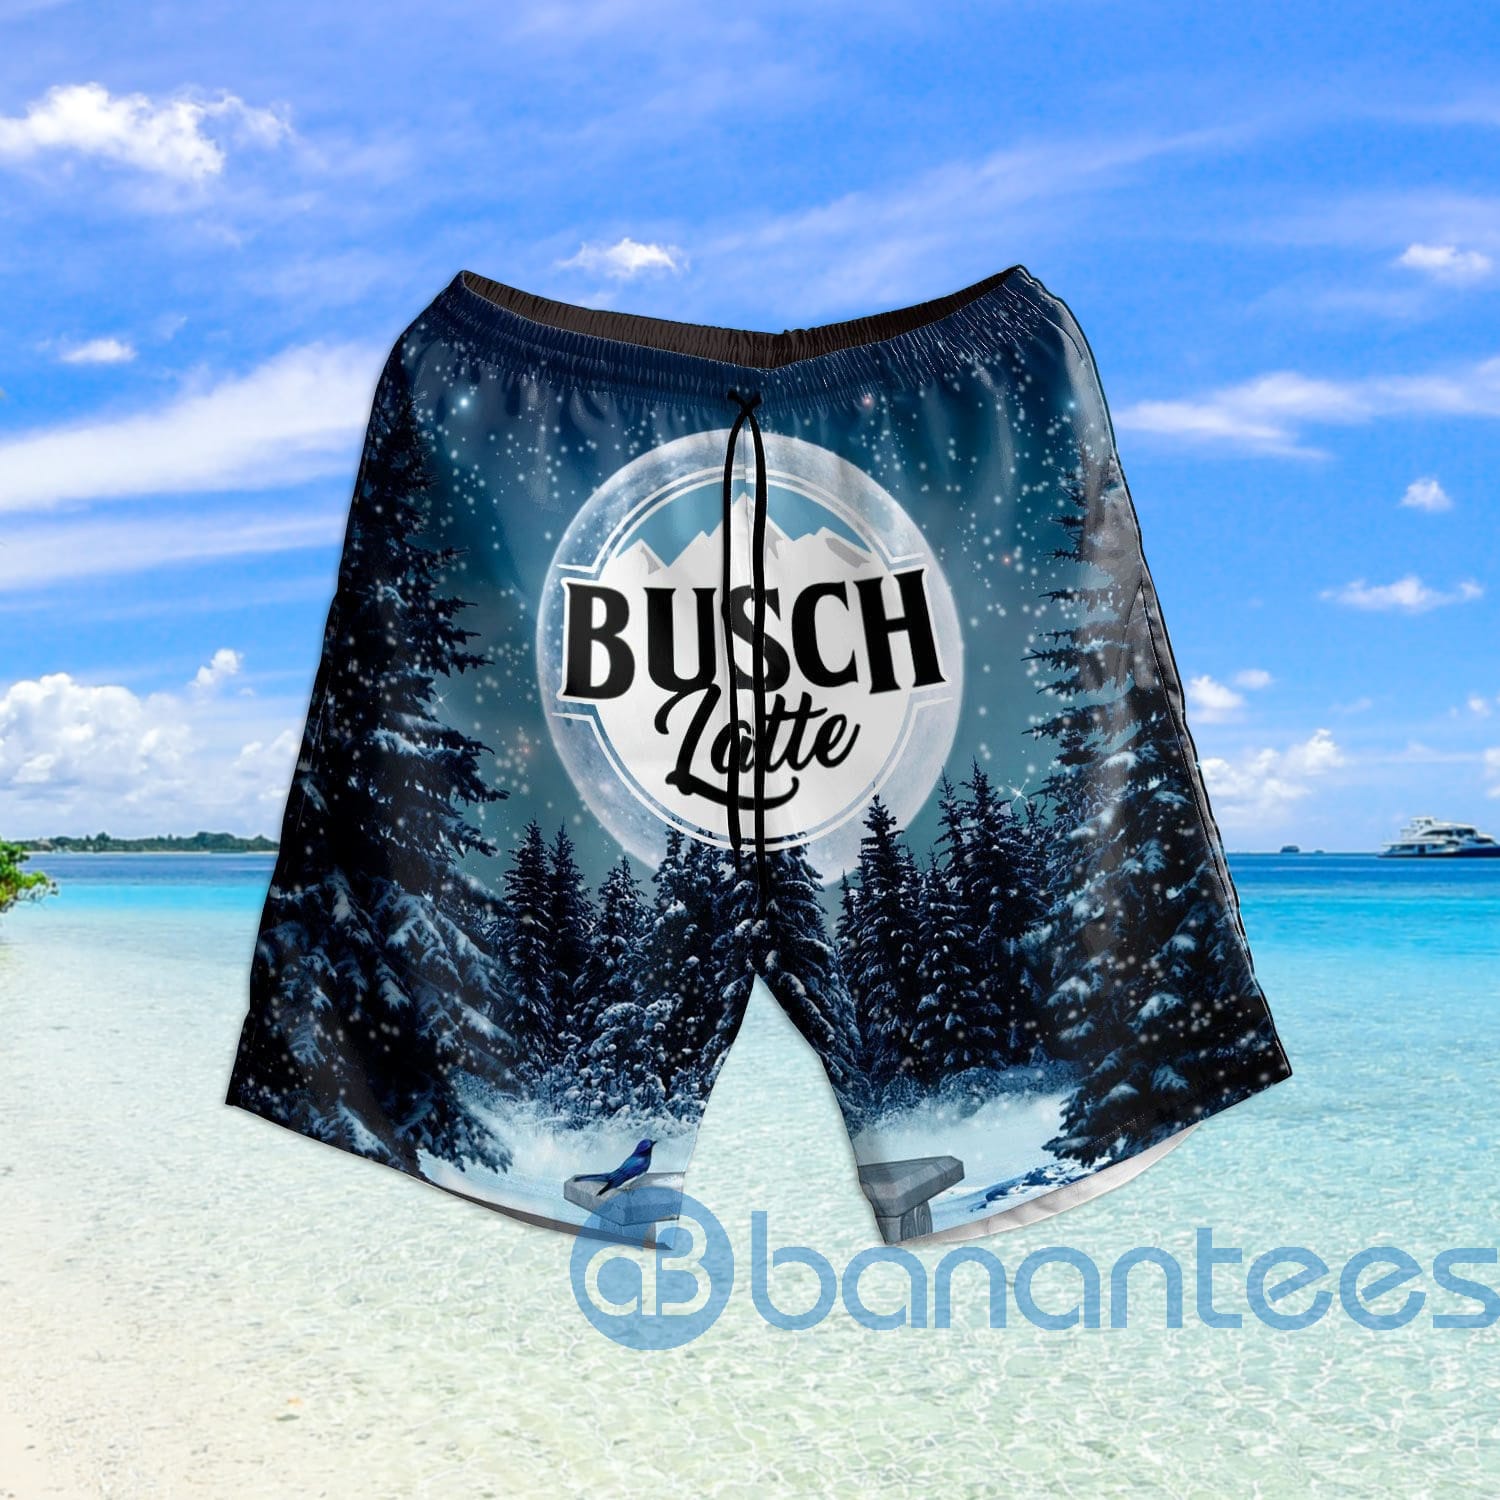 Busch Latte Winter Beach Shorts Beer Lovers Father Day Gift